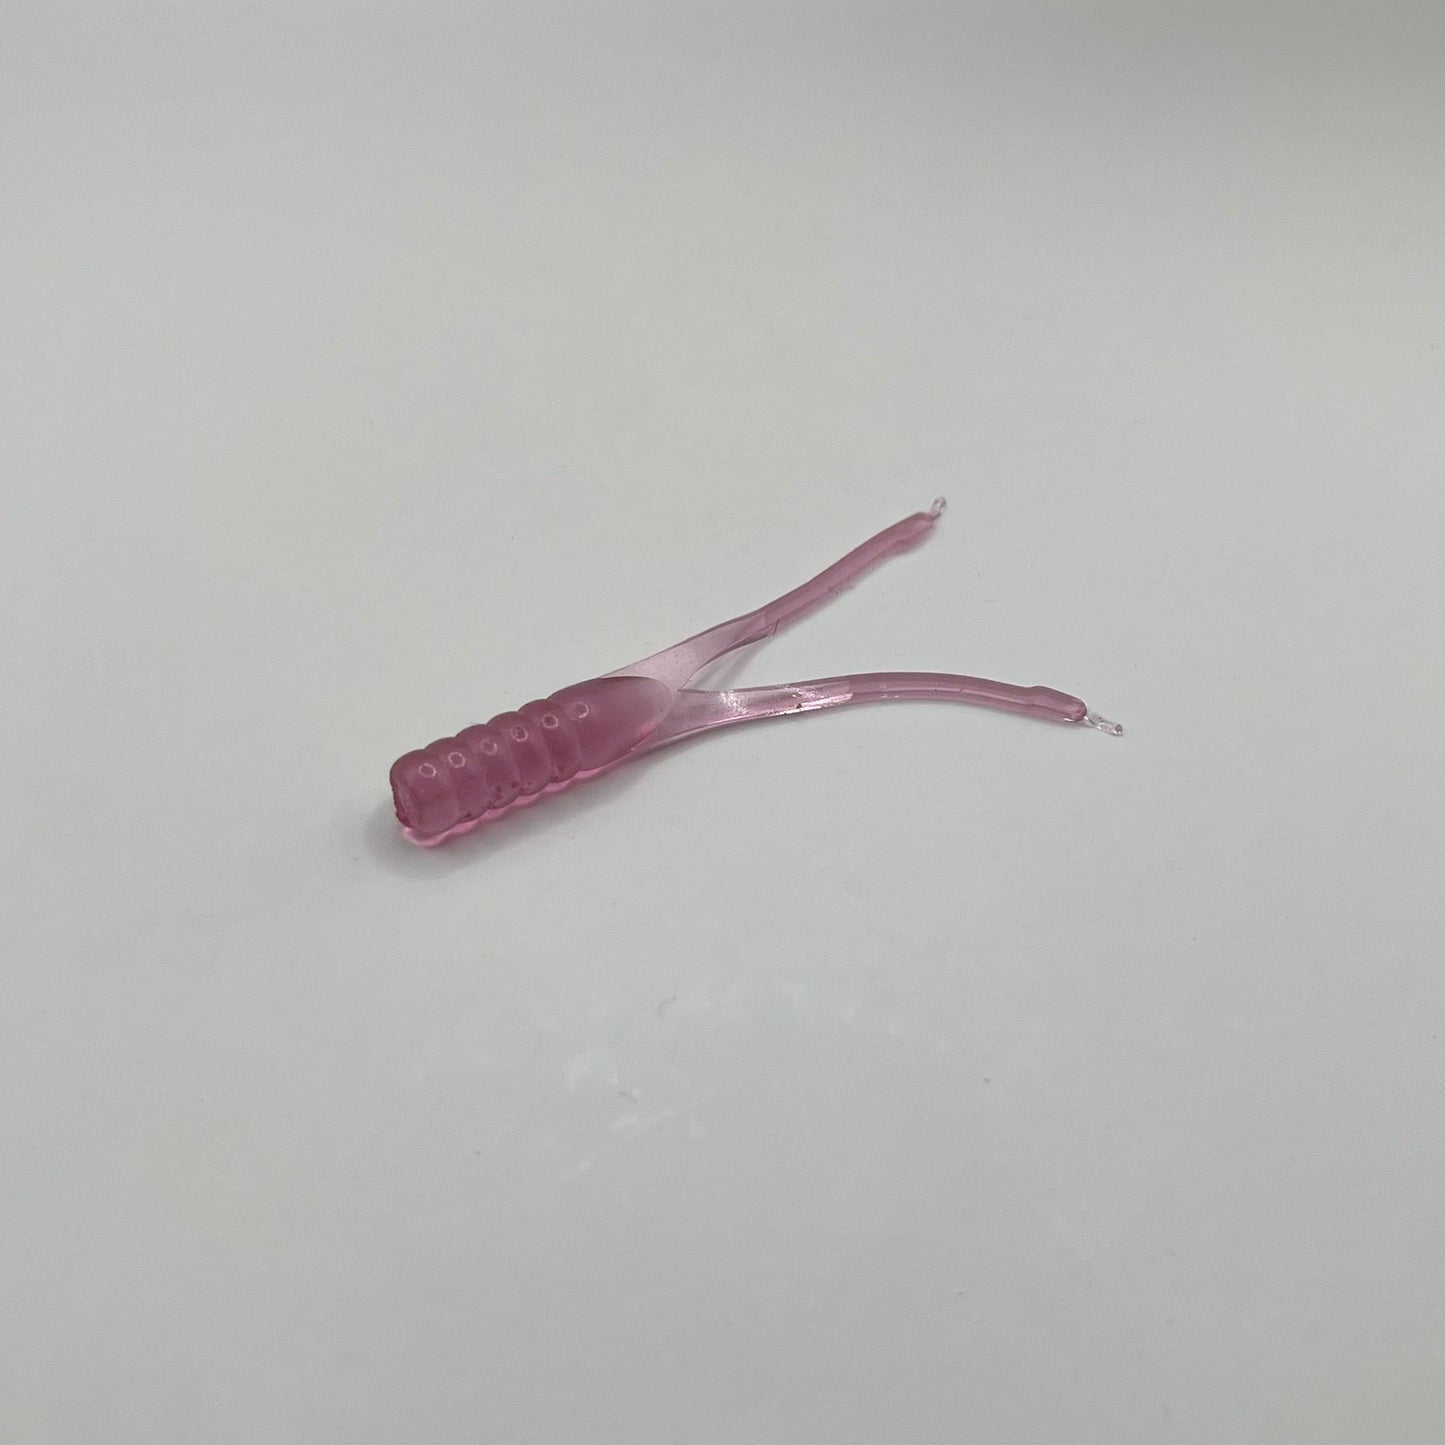 Red Shad Crappie Beetle Bug 2.25" - Premium Soft Plastic Lure from JAC’D Bait Co - Shop now!